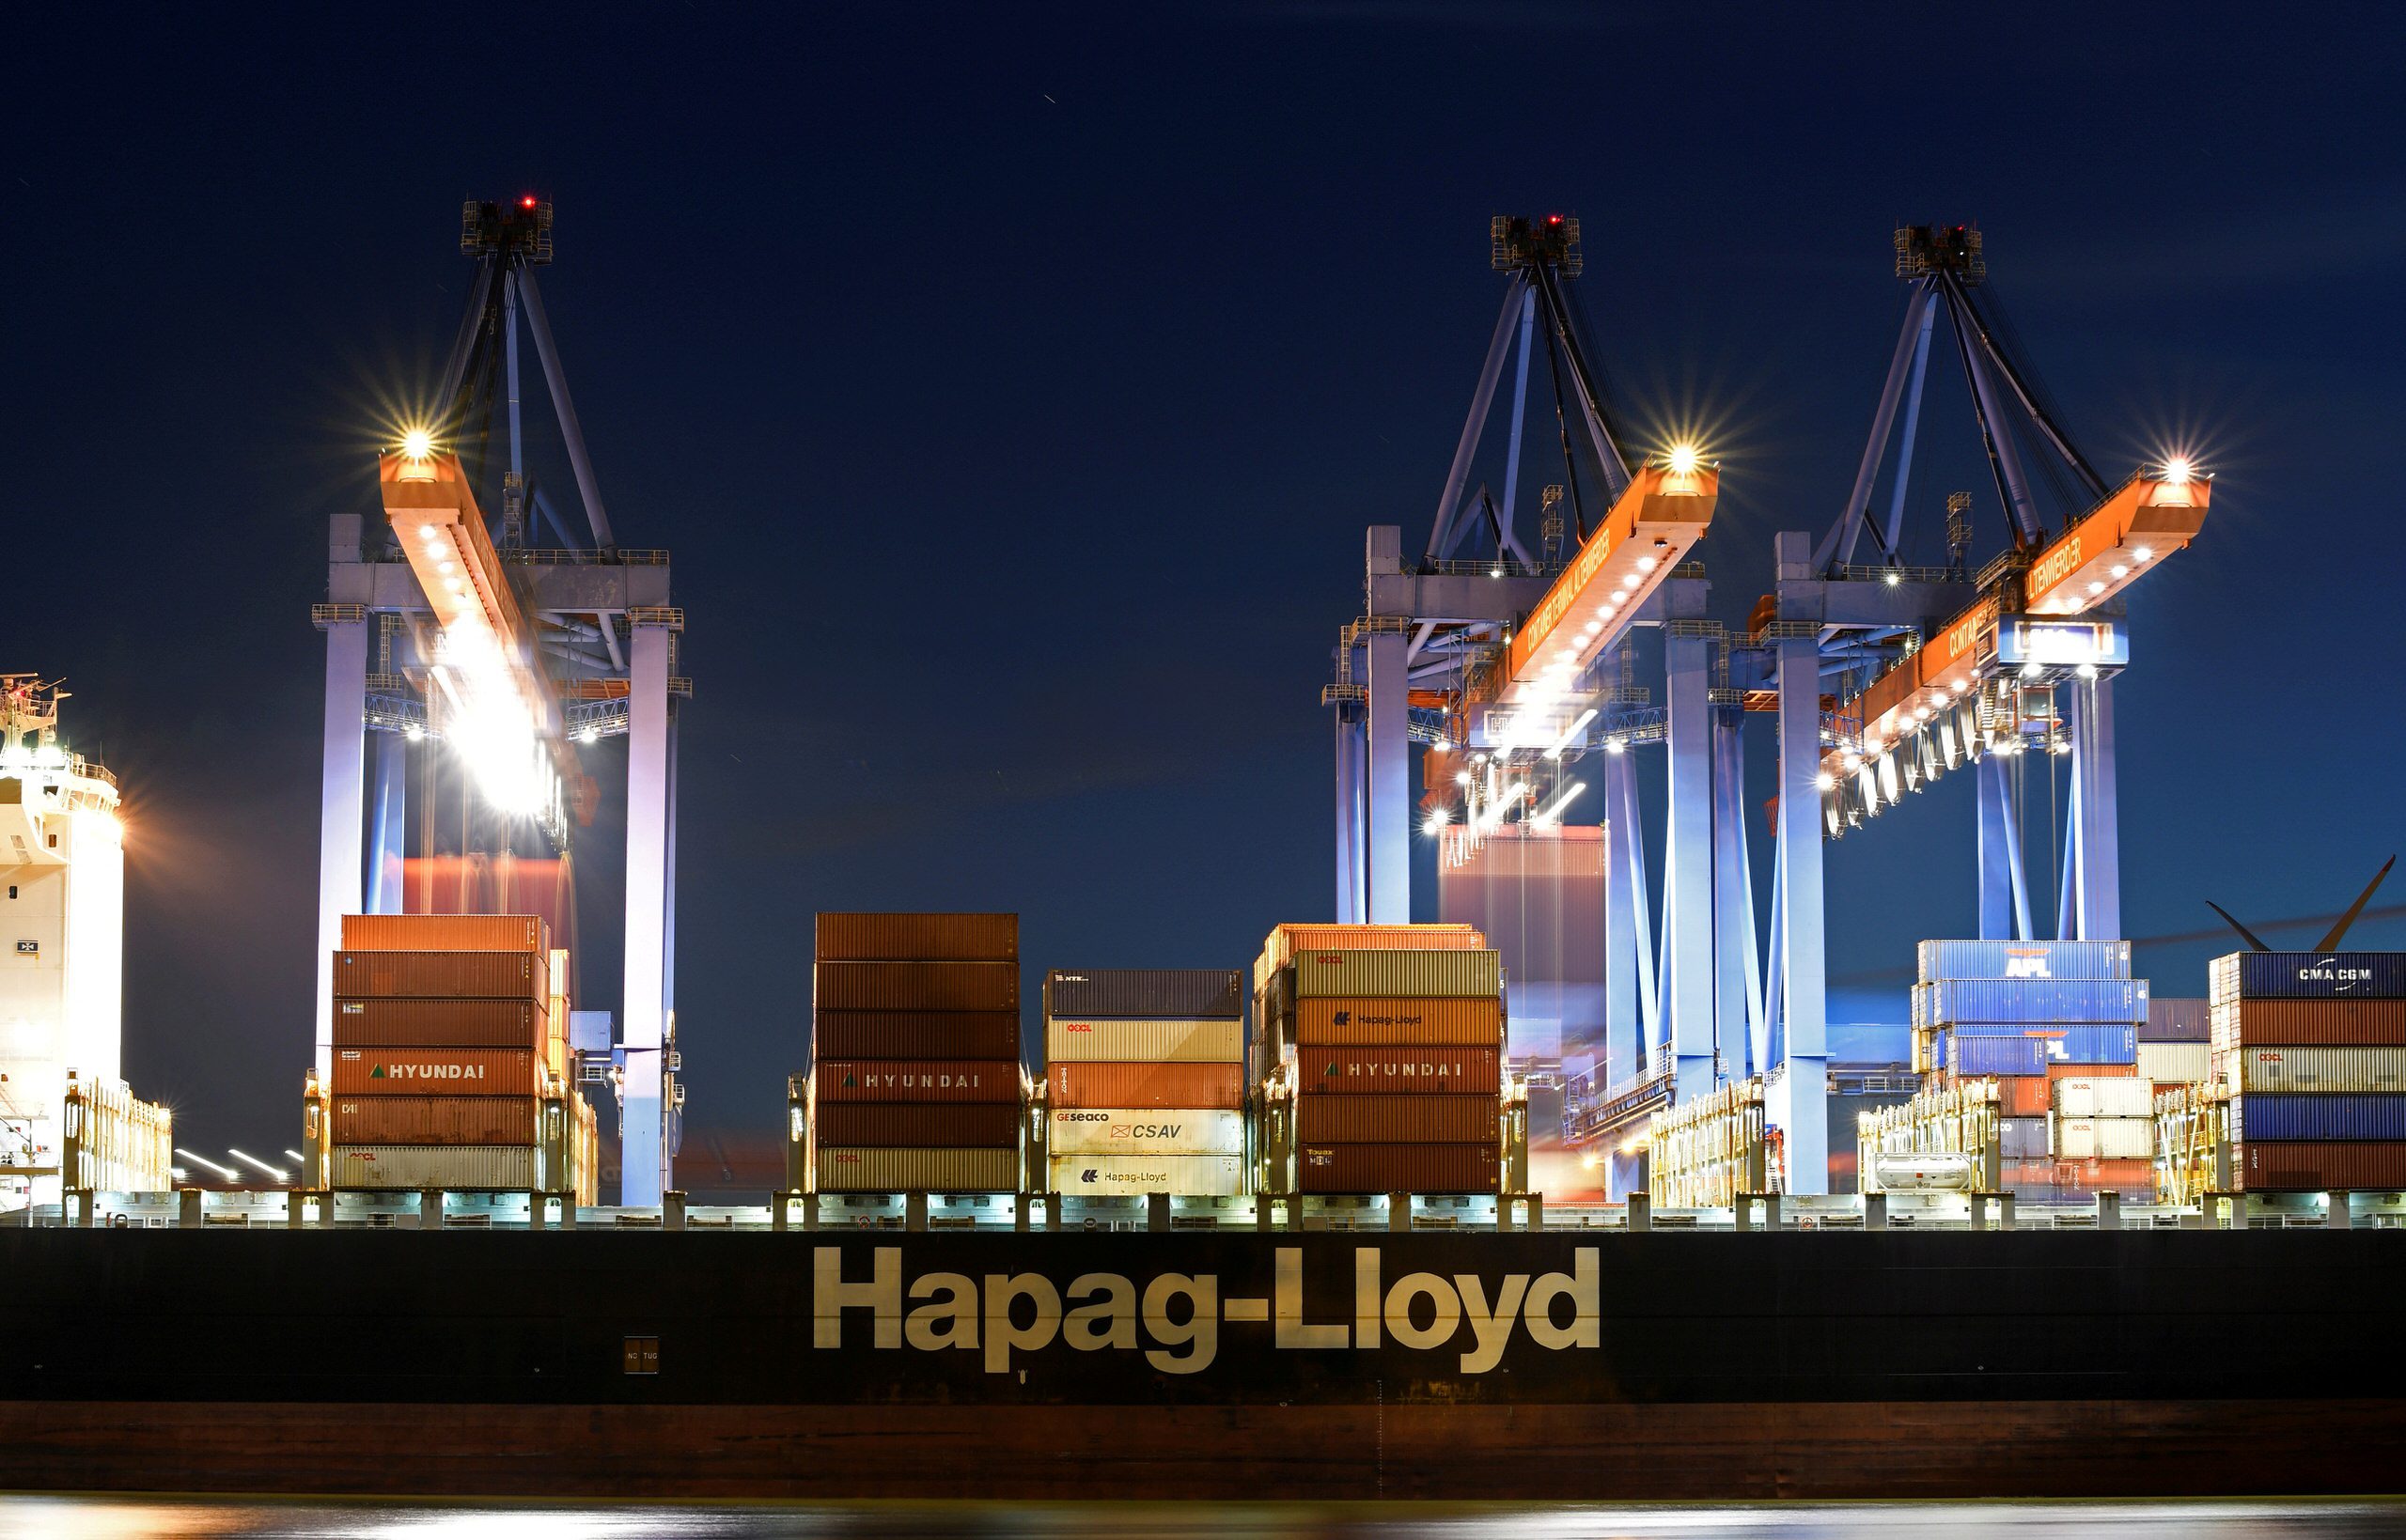 Hapag-Lloyd Marked 175th Year with Record Profit, But Significant Decline ‘Inevitable’ in 2023